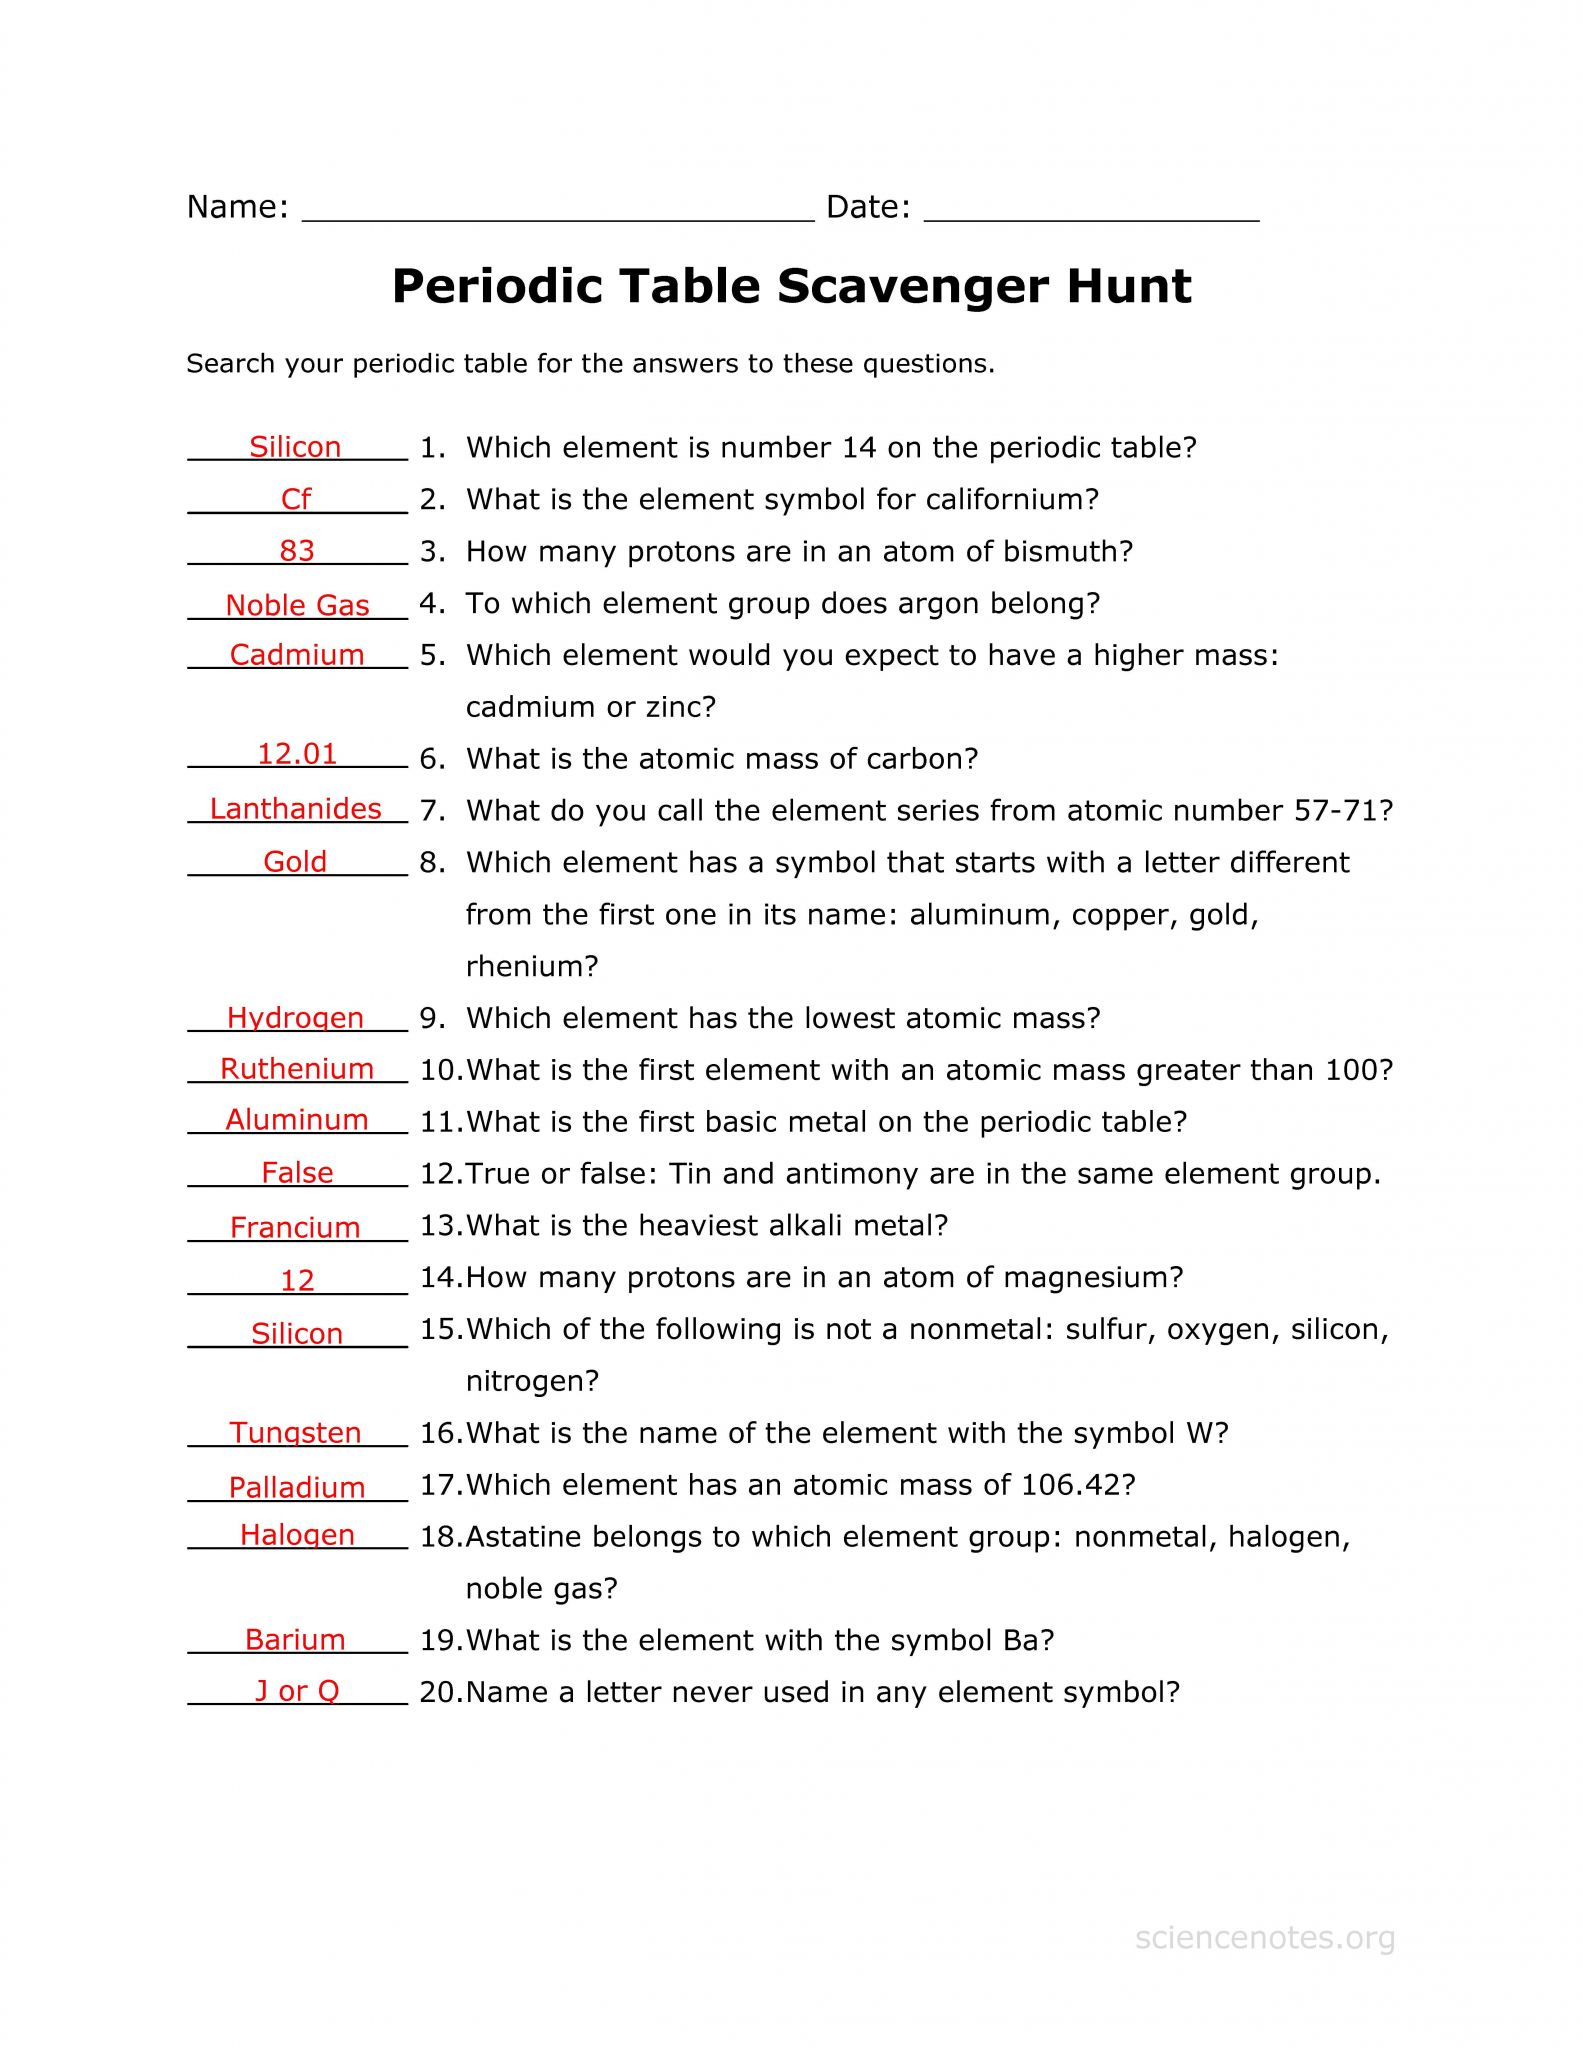 Density Worksheet Answers Chemistry Also Answer Key to the Periodic Table Scavenger Hunt Worksheet Related